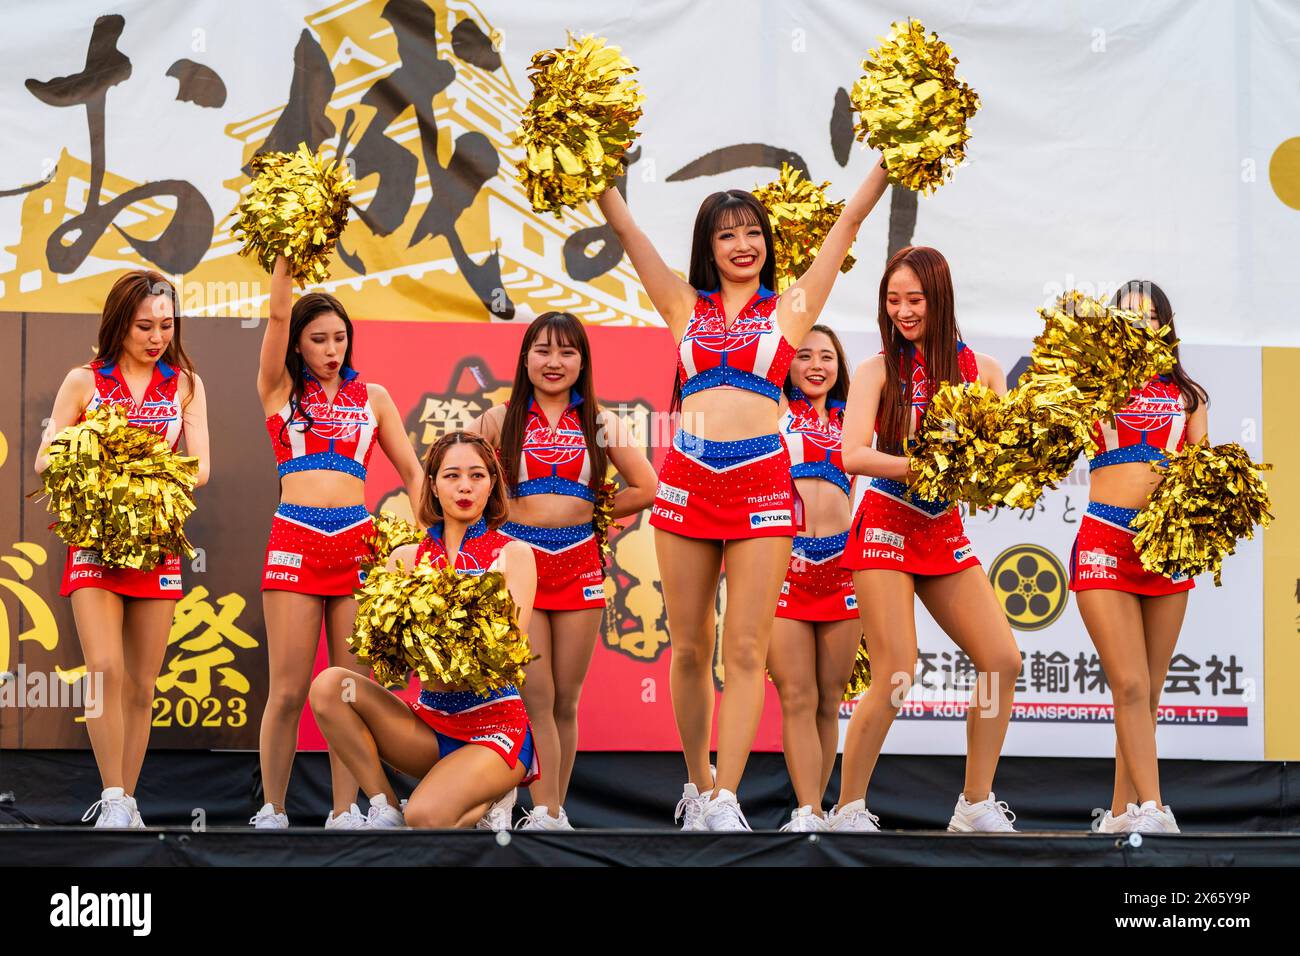 Japanese teenage women cheerleader Yosakoi dancers in tank tops and mini skirts dancing on stage holding gold glittery pom poms at the Kyusyu Gassai. Stock Photo